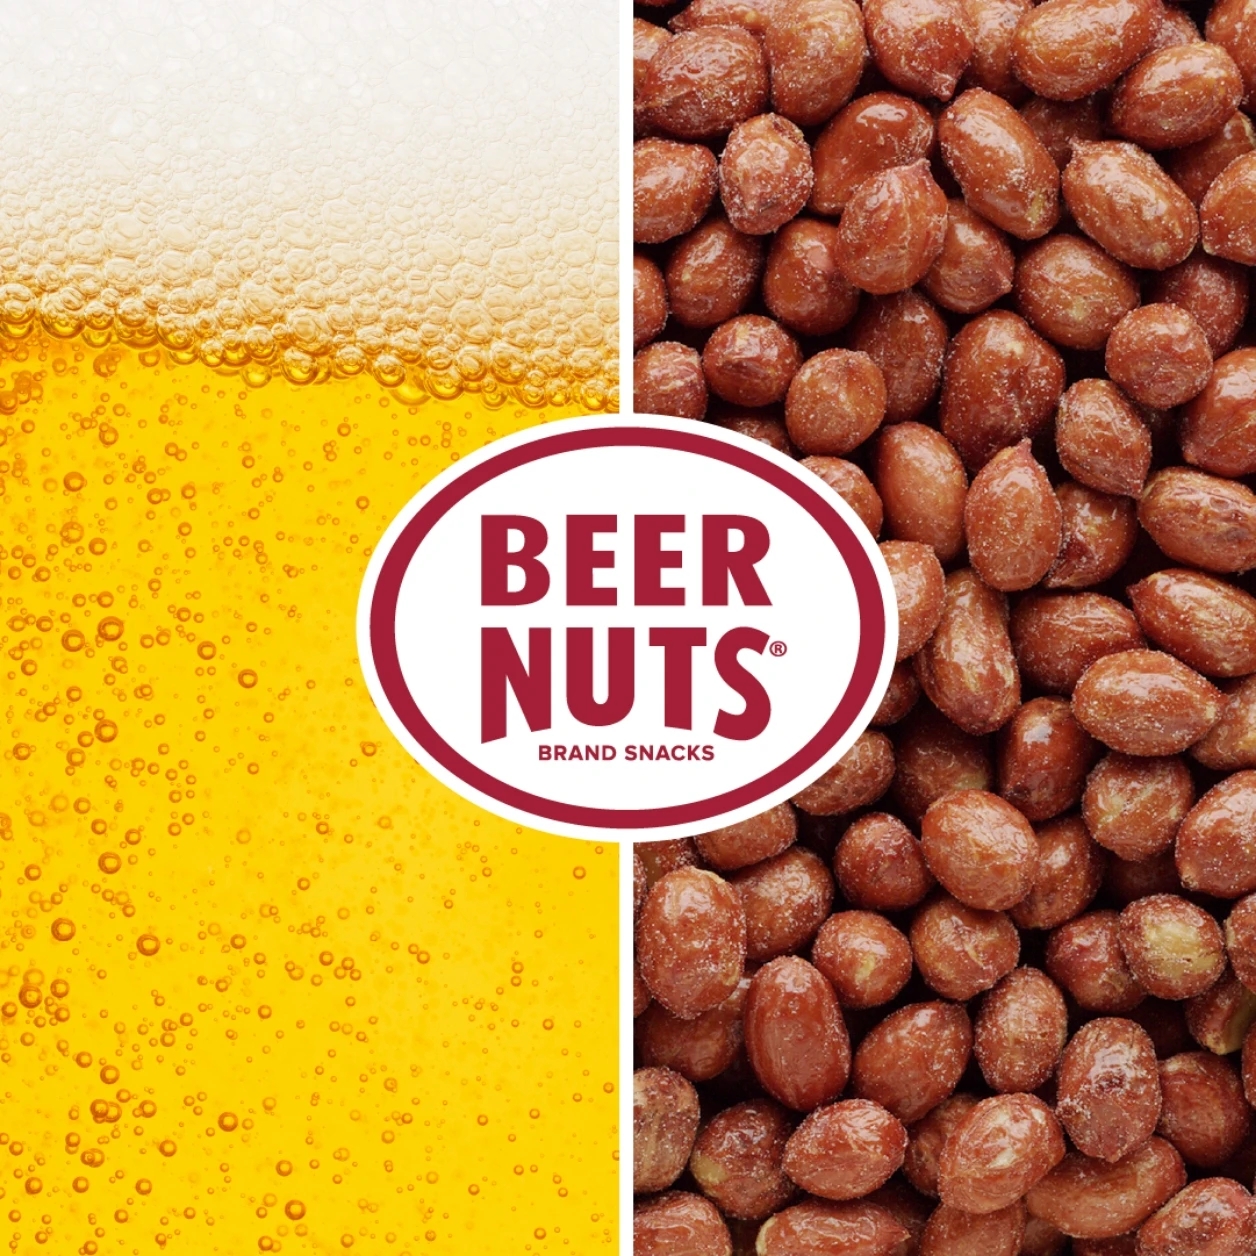 Beer Nuts on since 1953.